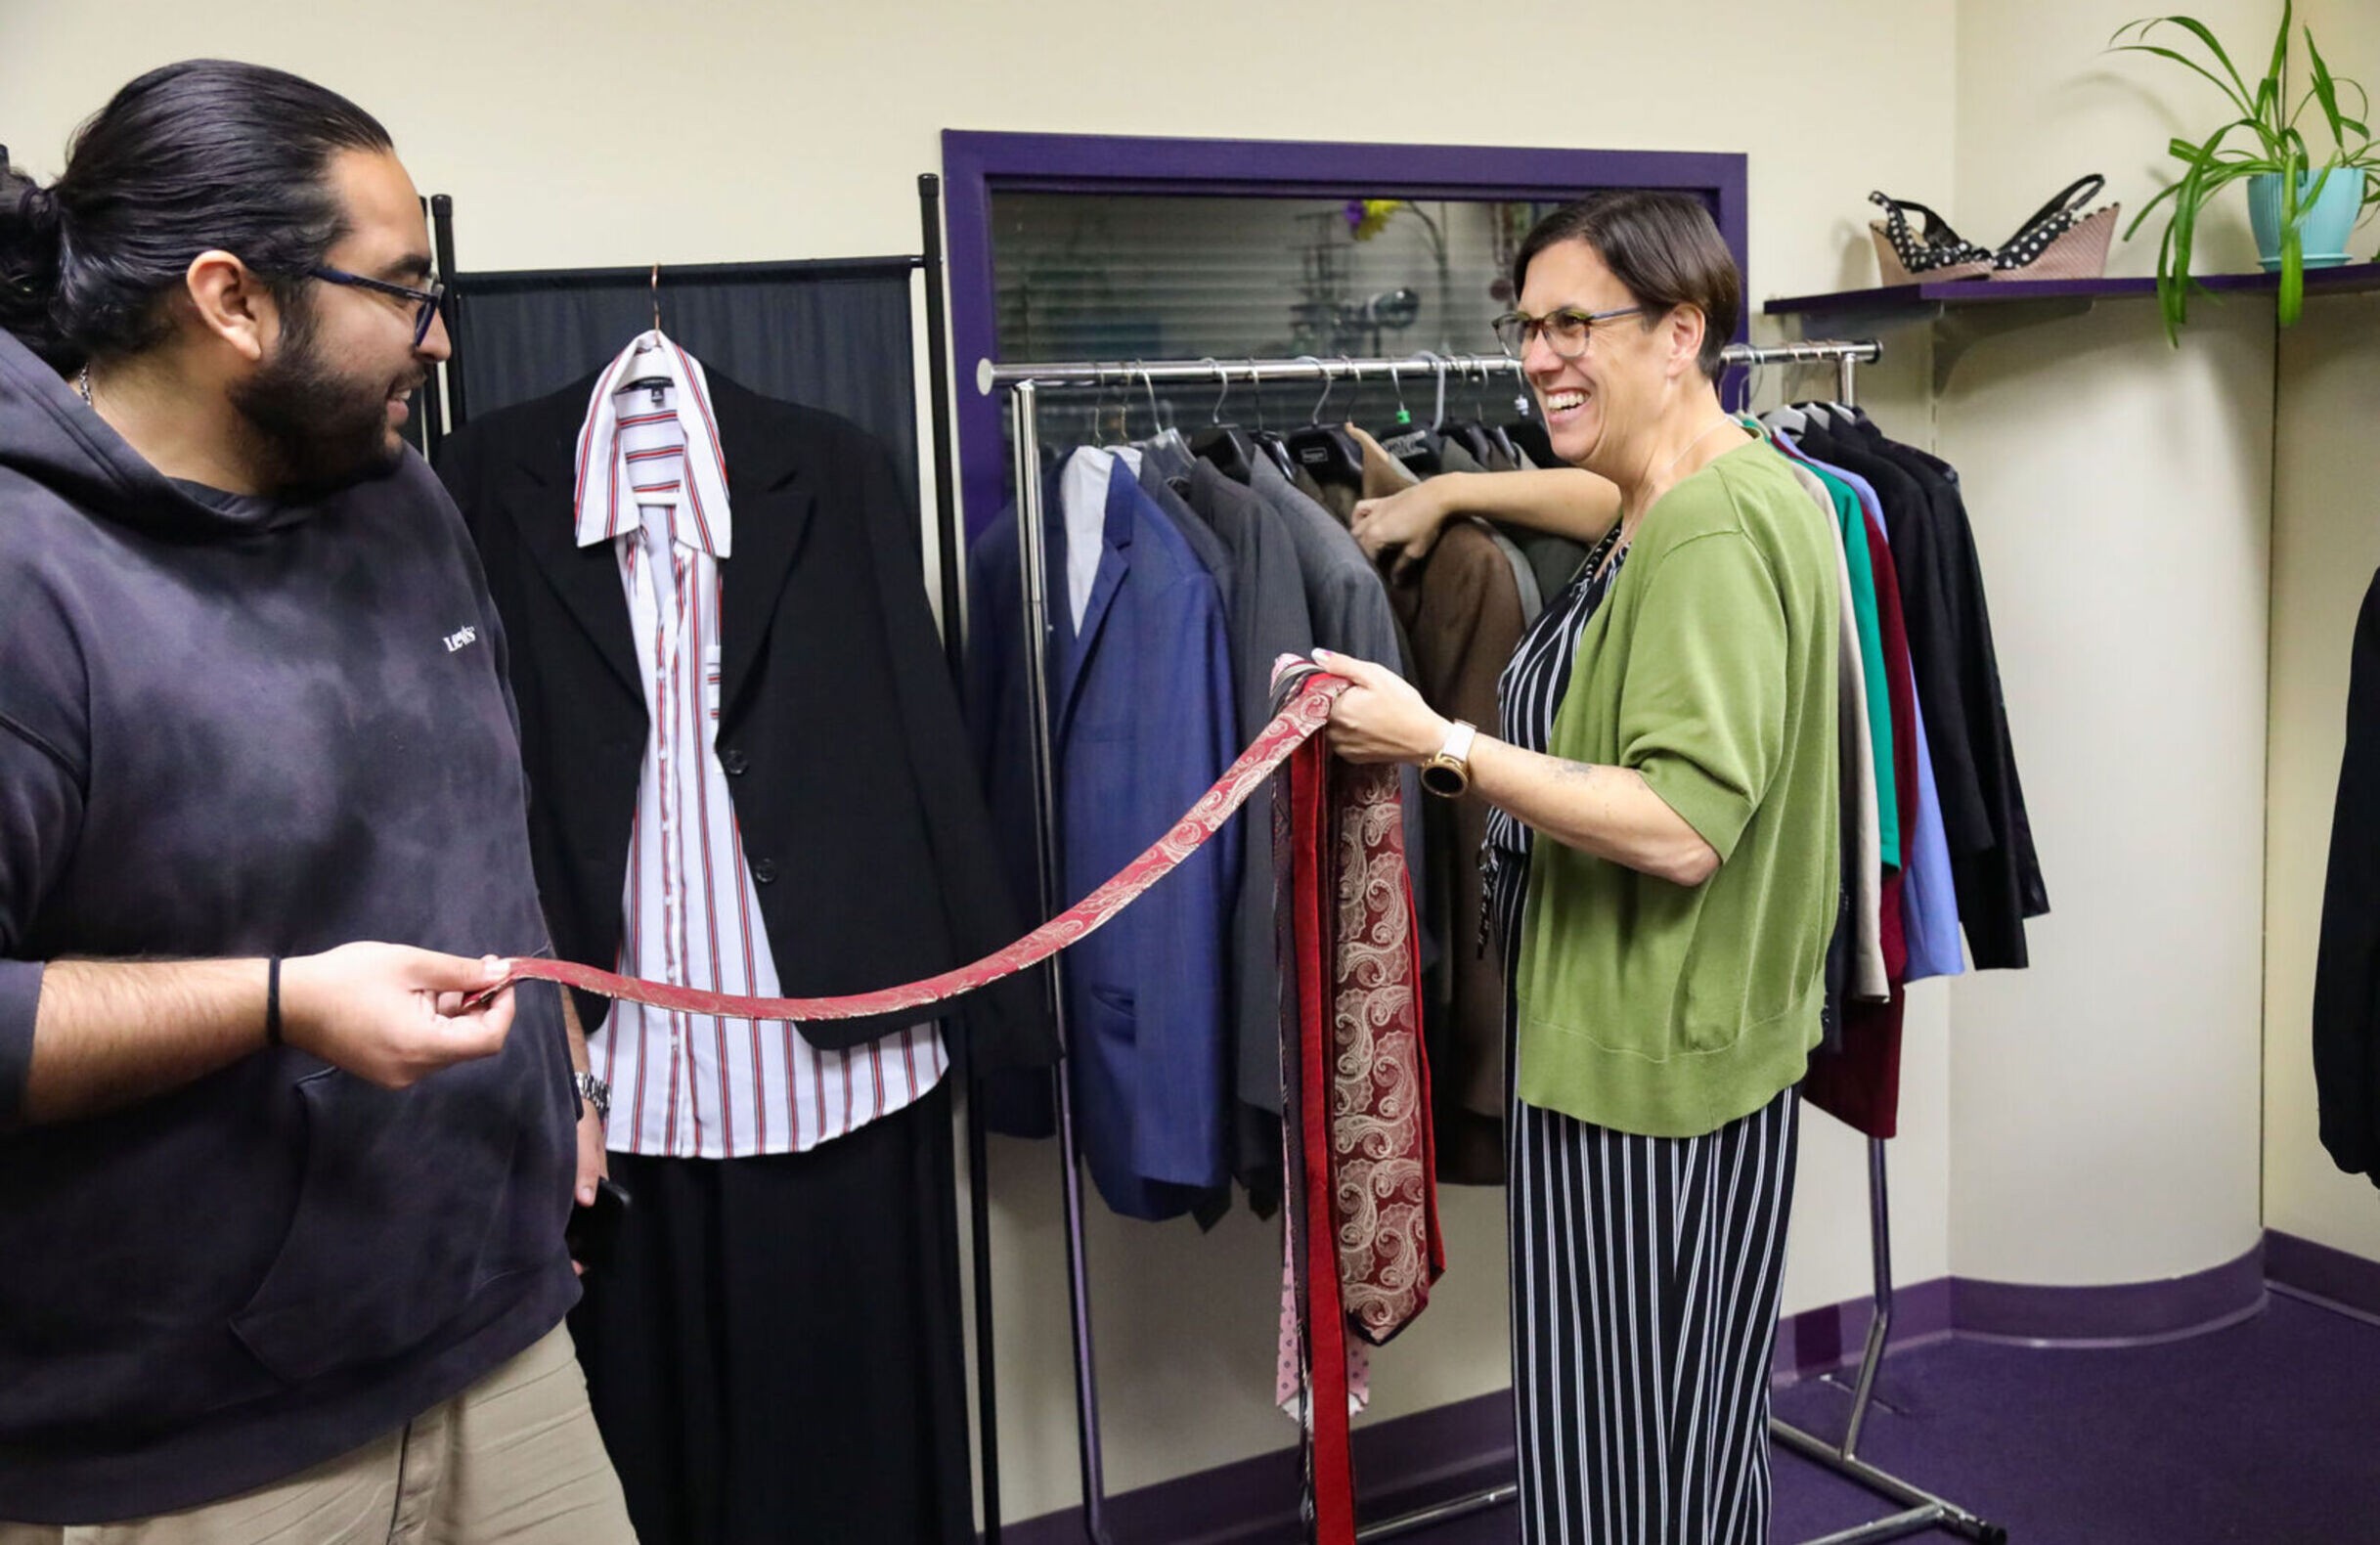 A career counselor helps a visitor in the Career Closet